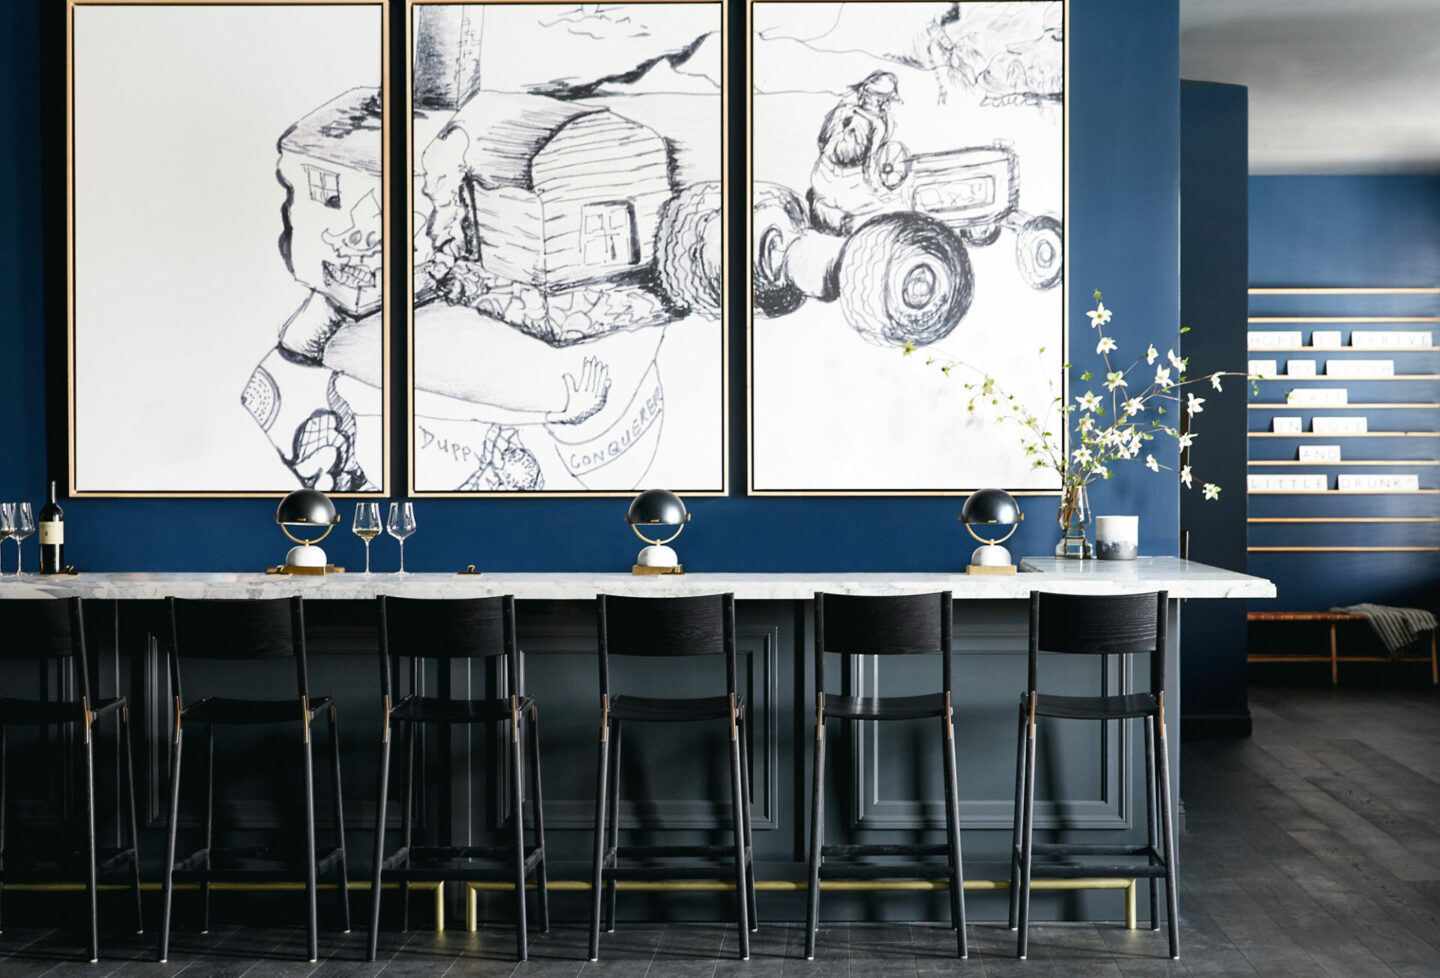 Indoor wine bar seating with art hanging on the walls